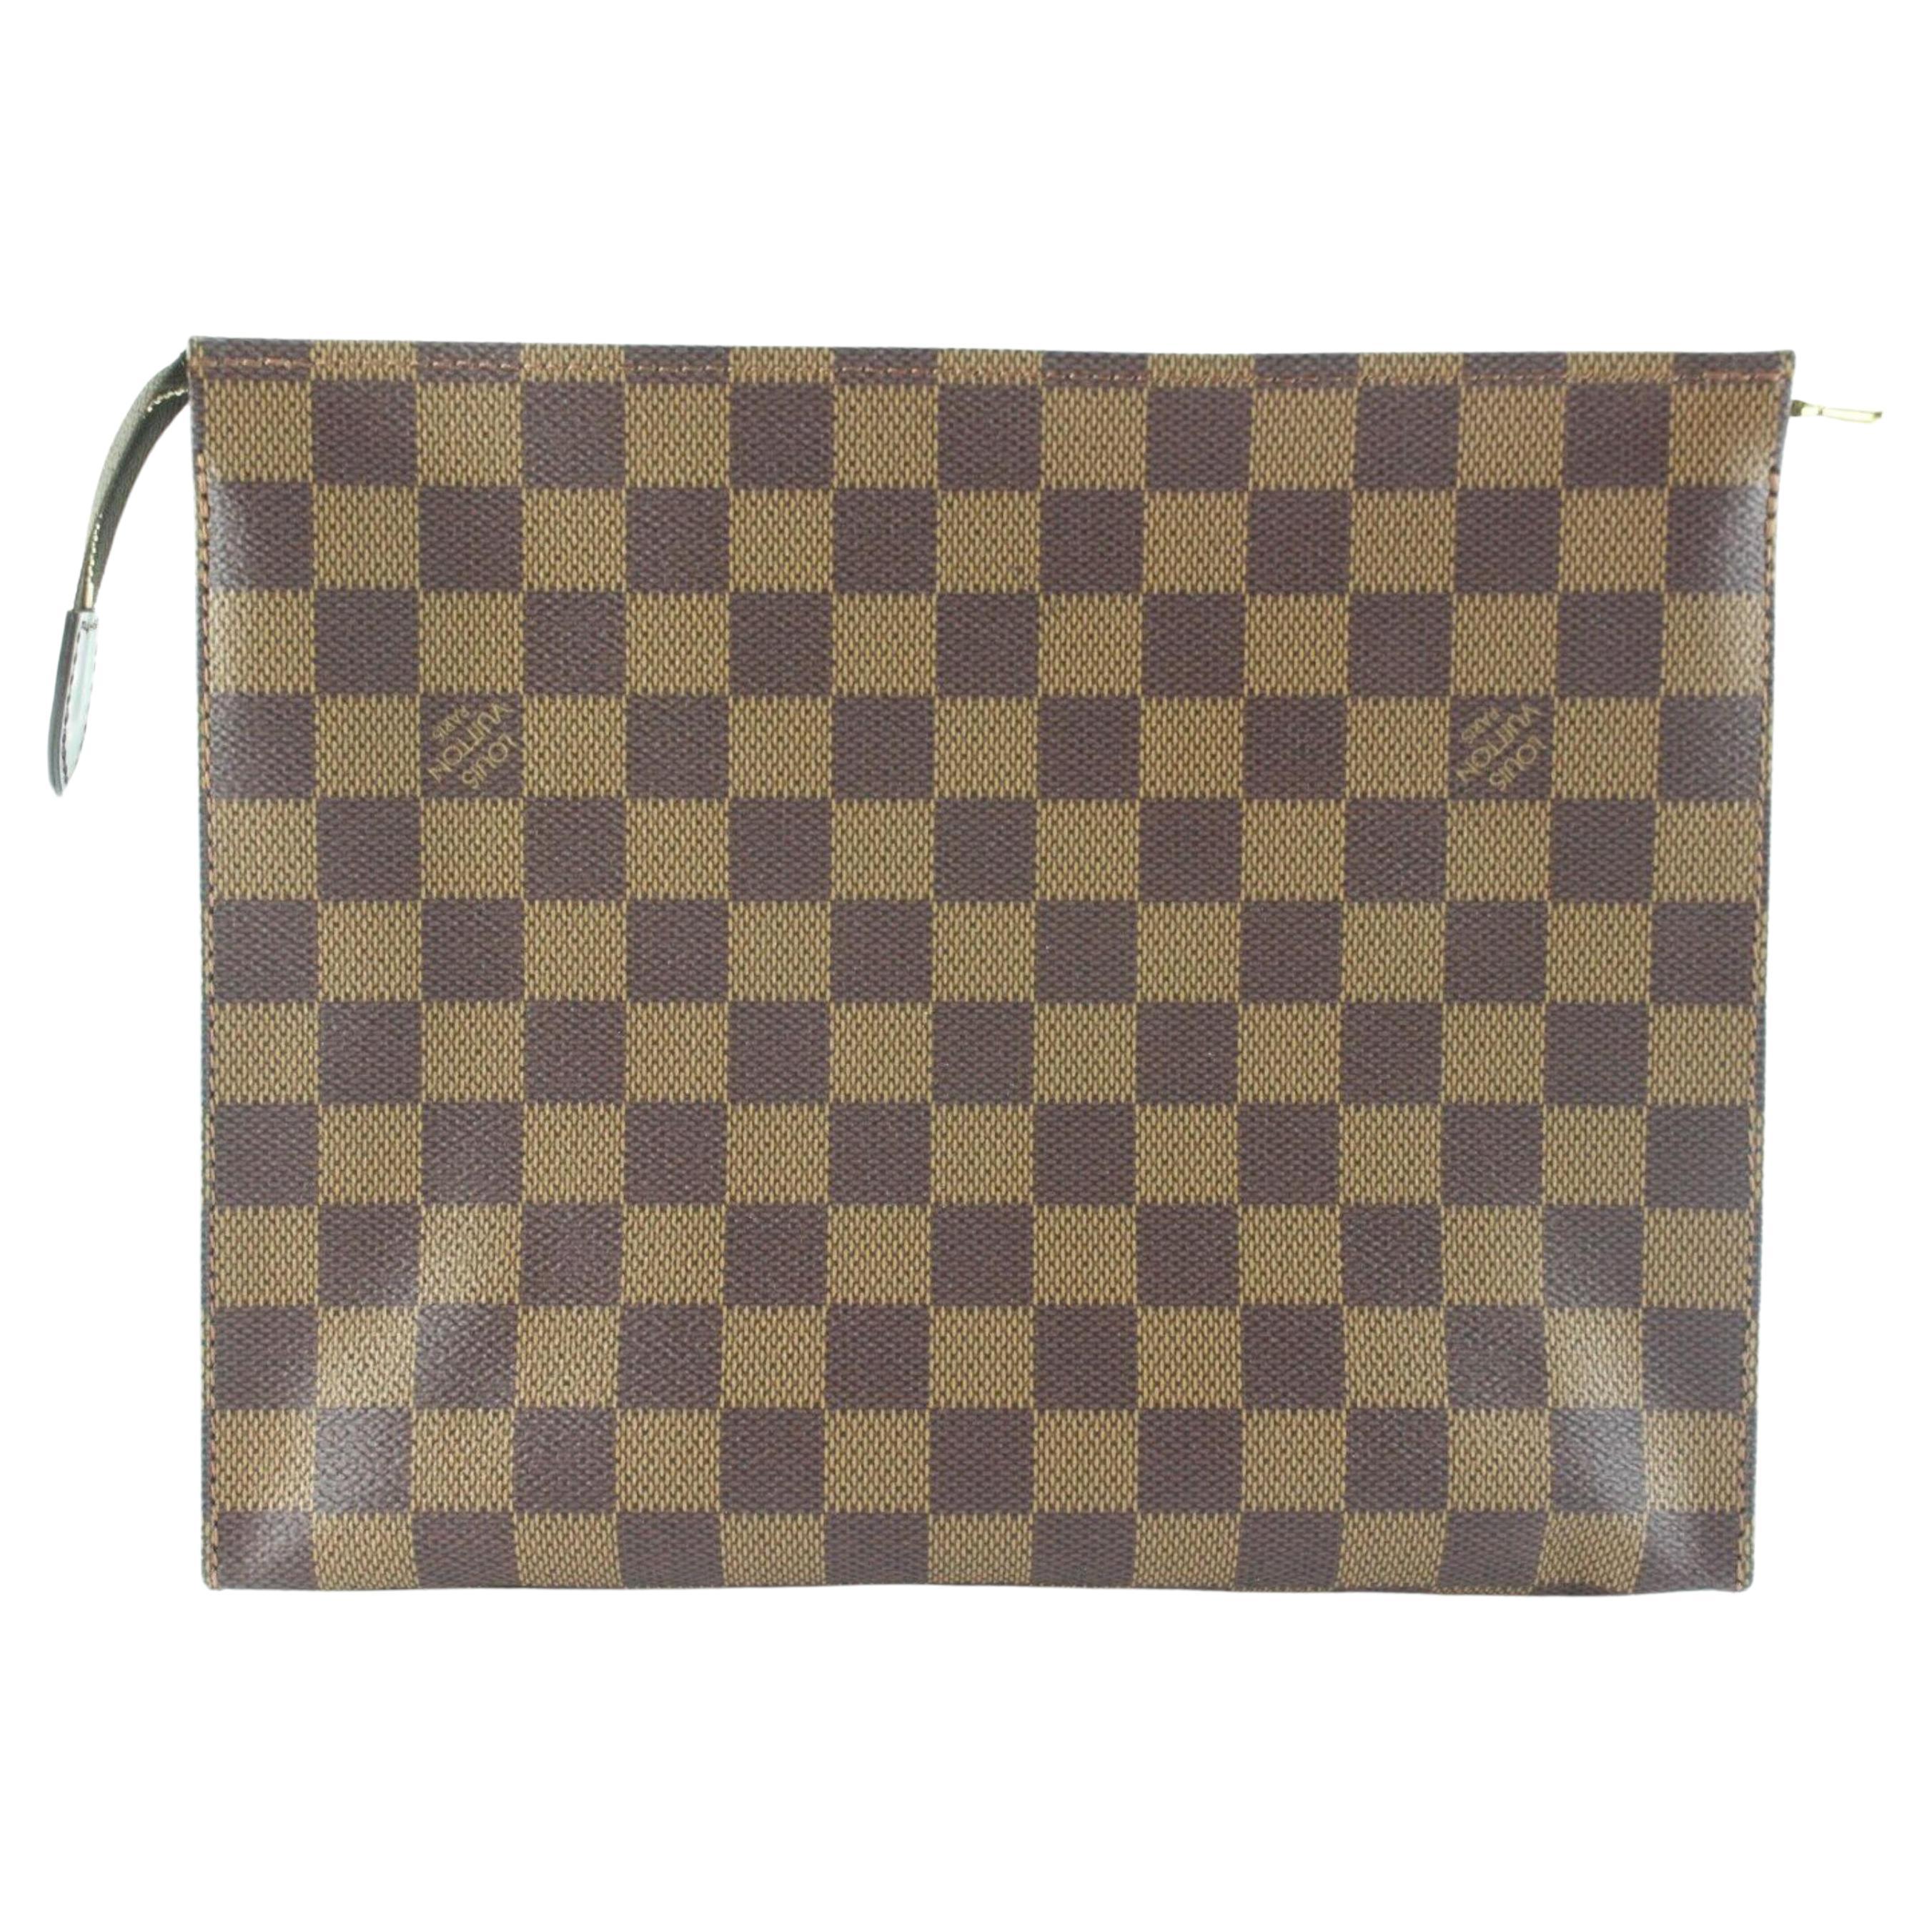 Louis Vuitton Ultra Rare Damier Ebene Toiletry 26 Cosmetic Pouch 2LK0427 For Sale